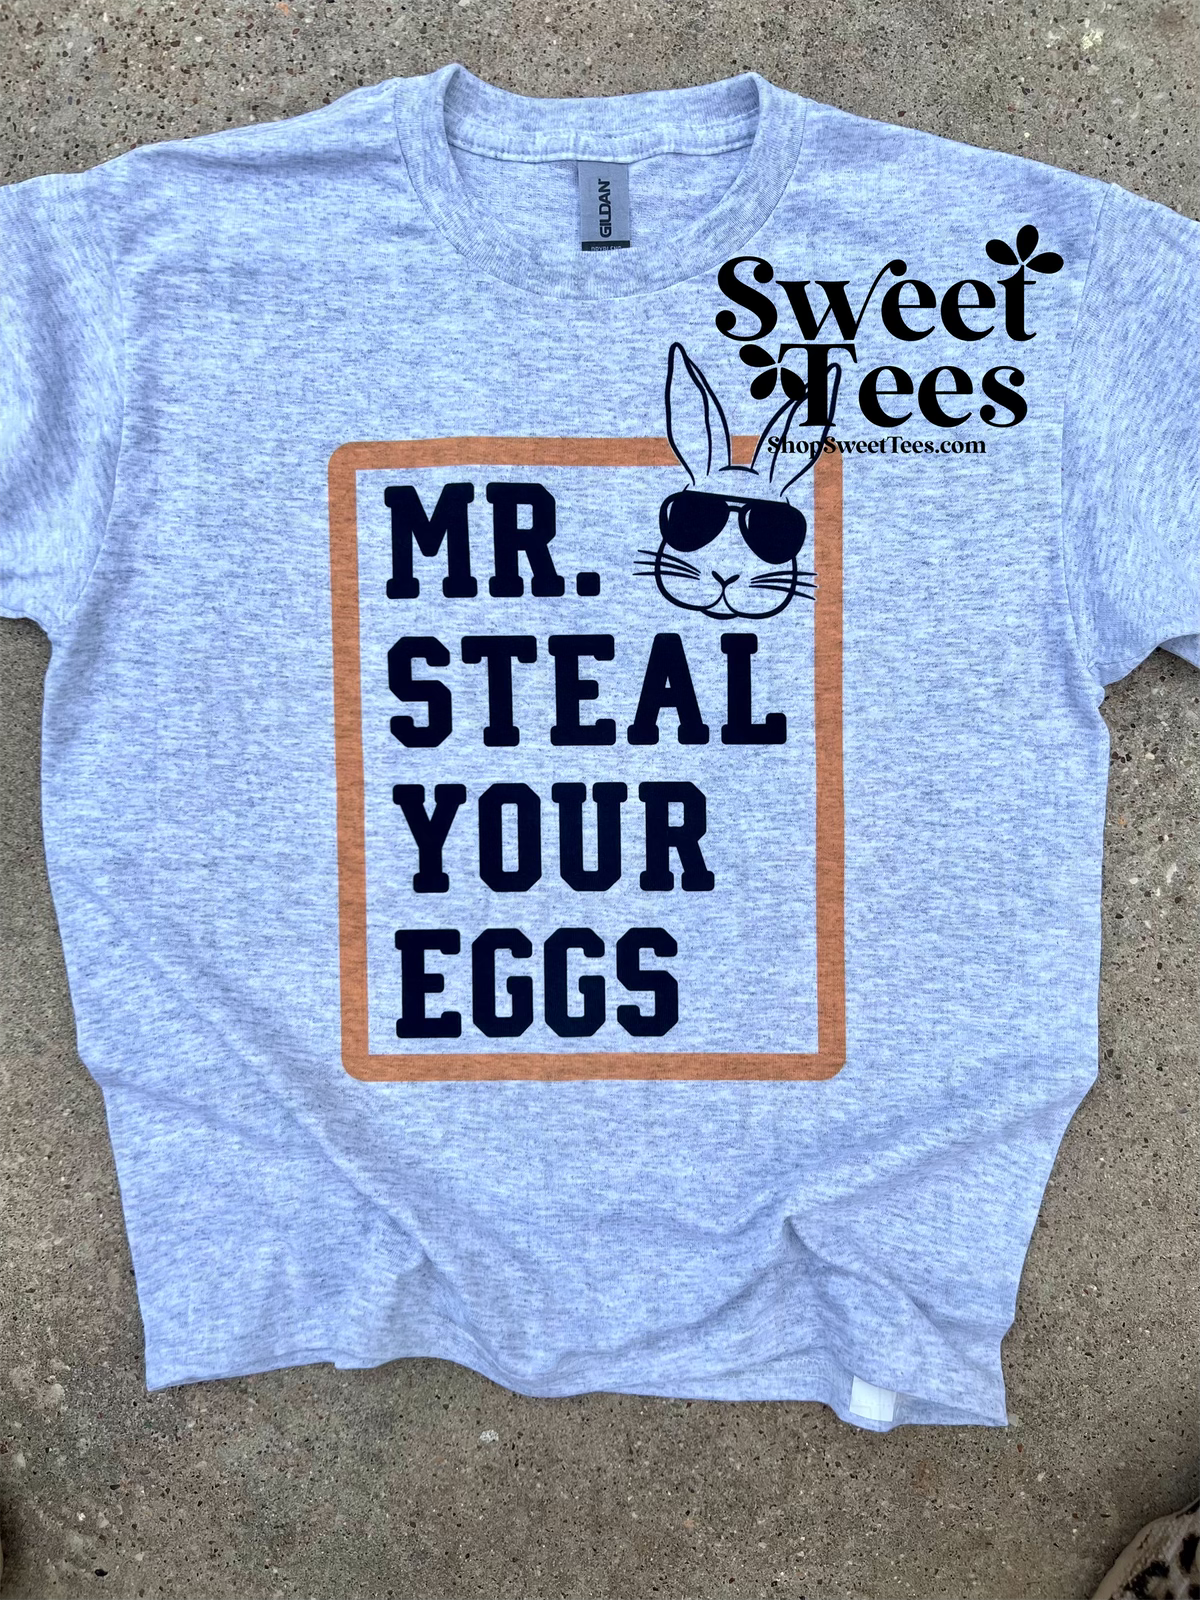 Mr. Steal Your Eggs tee